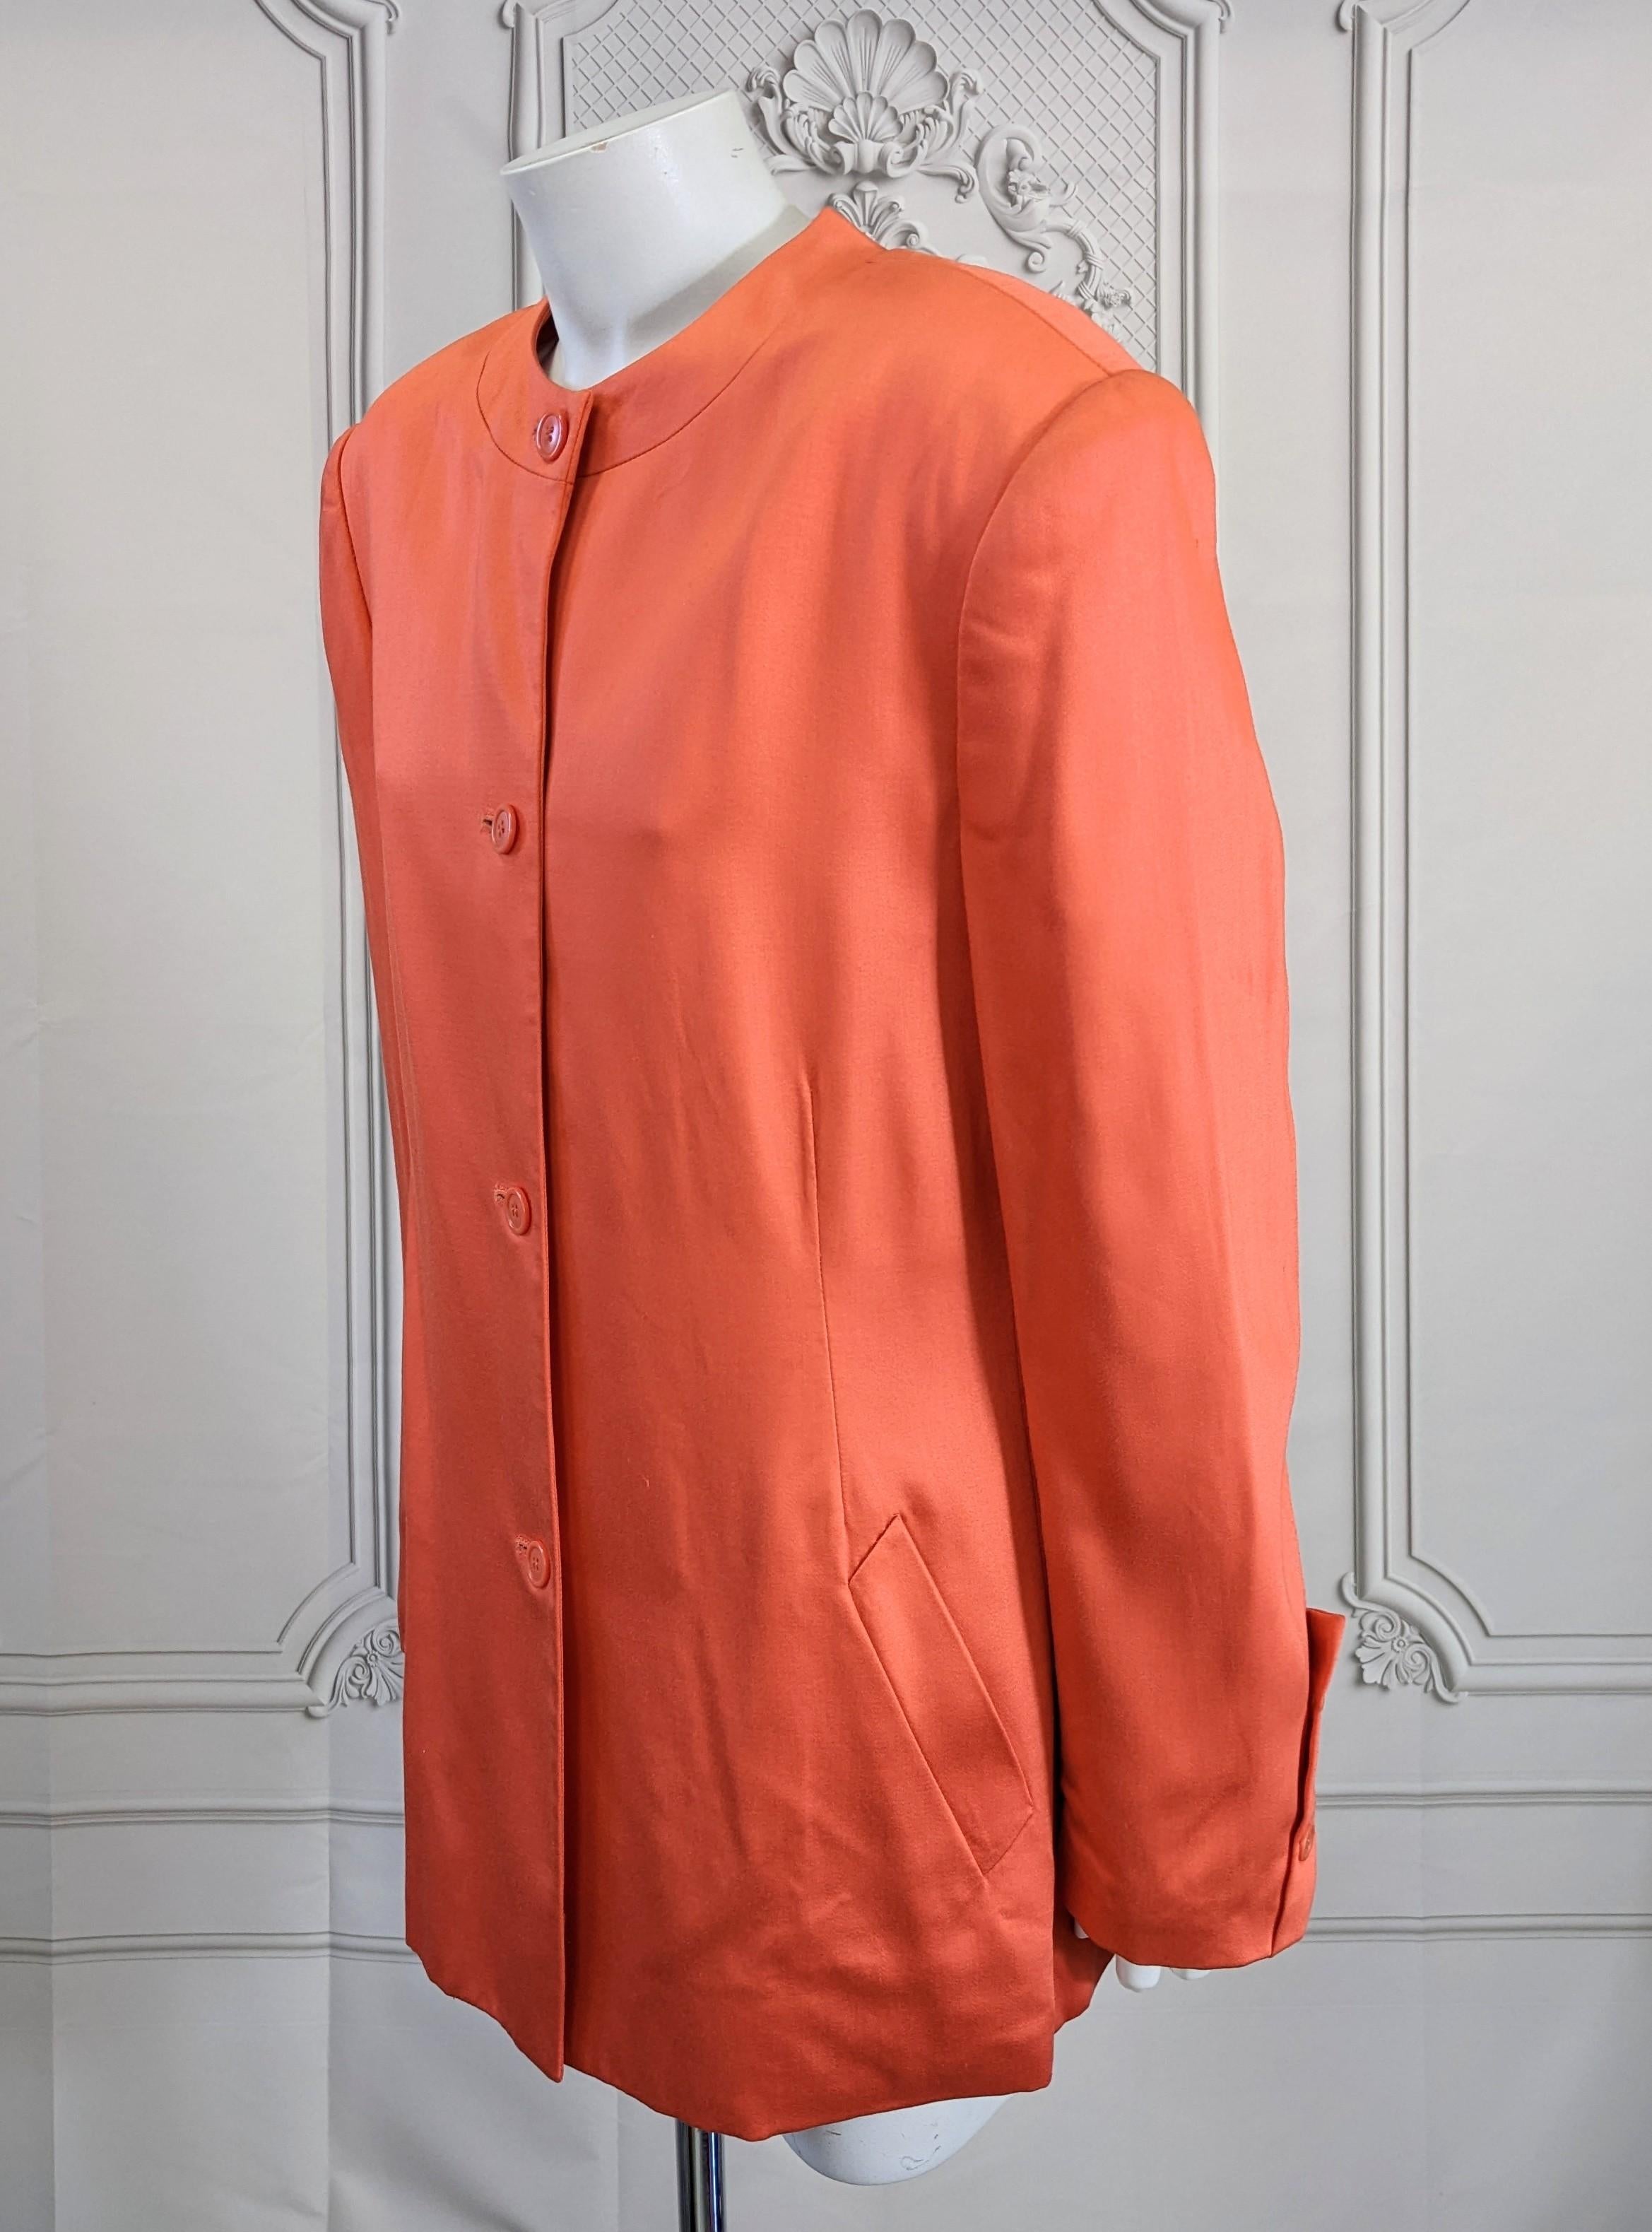 Stephen Sprouse Orange Twill Jacket In Good Condition For Sale In New York, NY